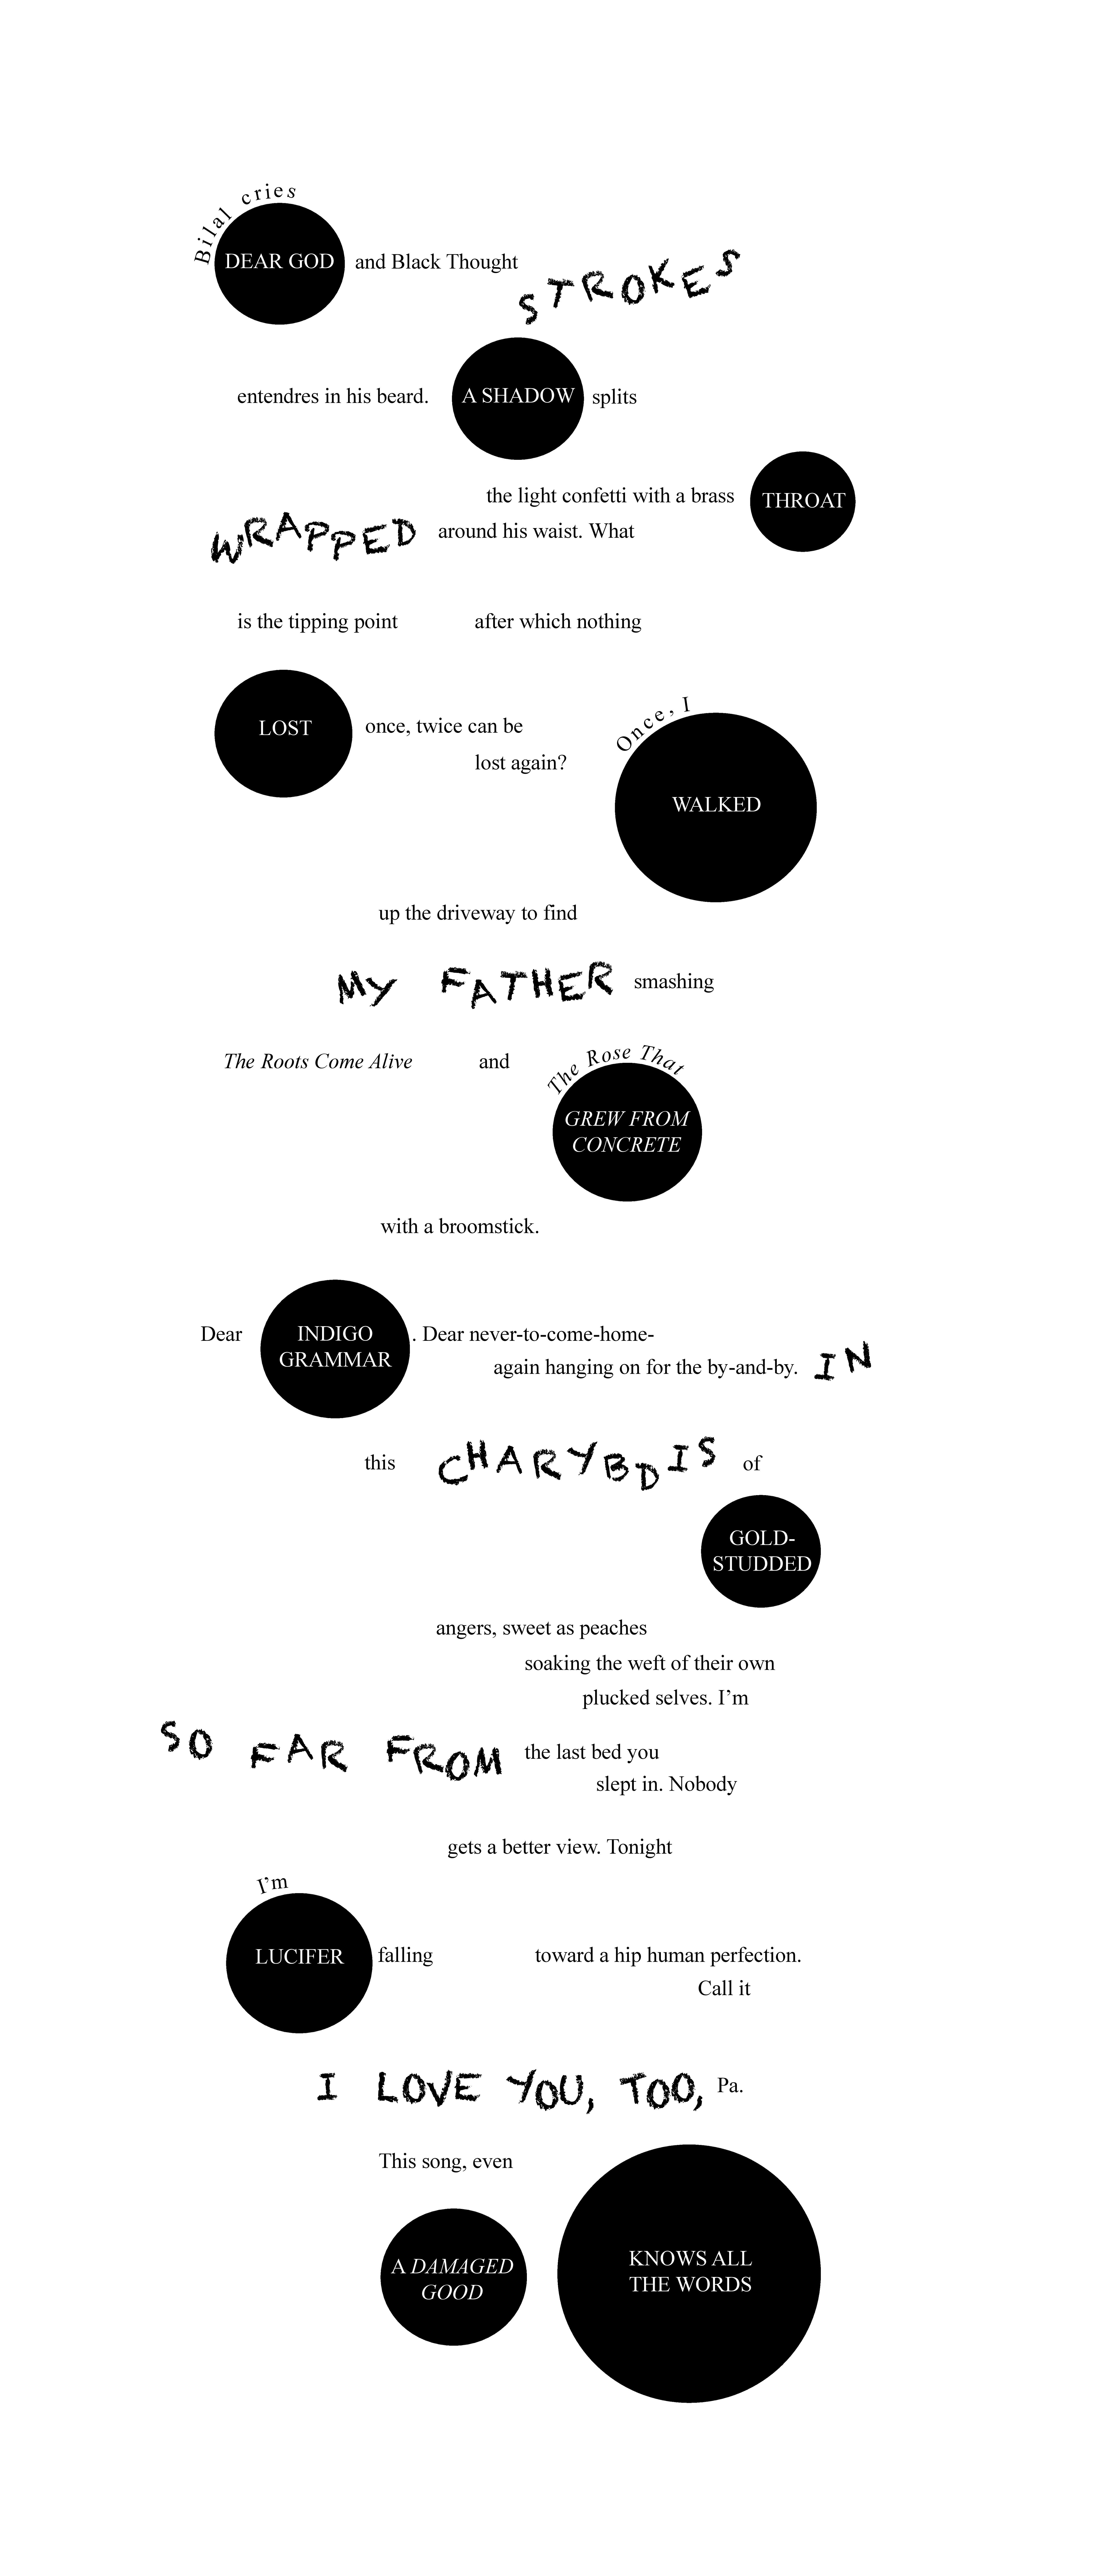 A visual poem with elements of regular text, text in handwritten font, and black spheres of varying sizes with white text inside. The woven structure allows for three different readings of the poem that are in conversation with each other. The complete text is as follows.     The Roots Do a Live Cover of Mayfield’s “Move On Up”     Bilal cries Dear God and Black Thought  strokes entendres in his beard. A shadow  splits the light confetti with a brass throat  wrapped around his waist. What  is the tipping point after which nothing  lost once, twice can be                           lost again? Once, I walked  up the driveway to find my father  smashing The Roots Come Alive and The Rose  That Grew from Concrete with a broom stick.     Dear indigo grammar. Dear never-  to-come-home-again hanging  on for the by-and-by. In this  Charybdis of gold-studded angers, sweet  as peaches soaking the weft of their  own plucked selves. I’m  so far from the last bed you  slept in. Nobody  gets a better view. Tonight     I’m Lucifer falling     toward a hip human perfection.  Call it I love you too, Pa.  This song, even a damaged good  knows all the words. 